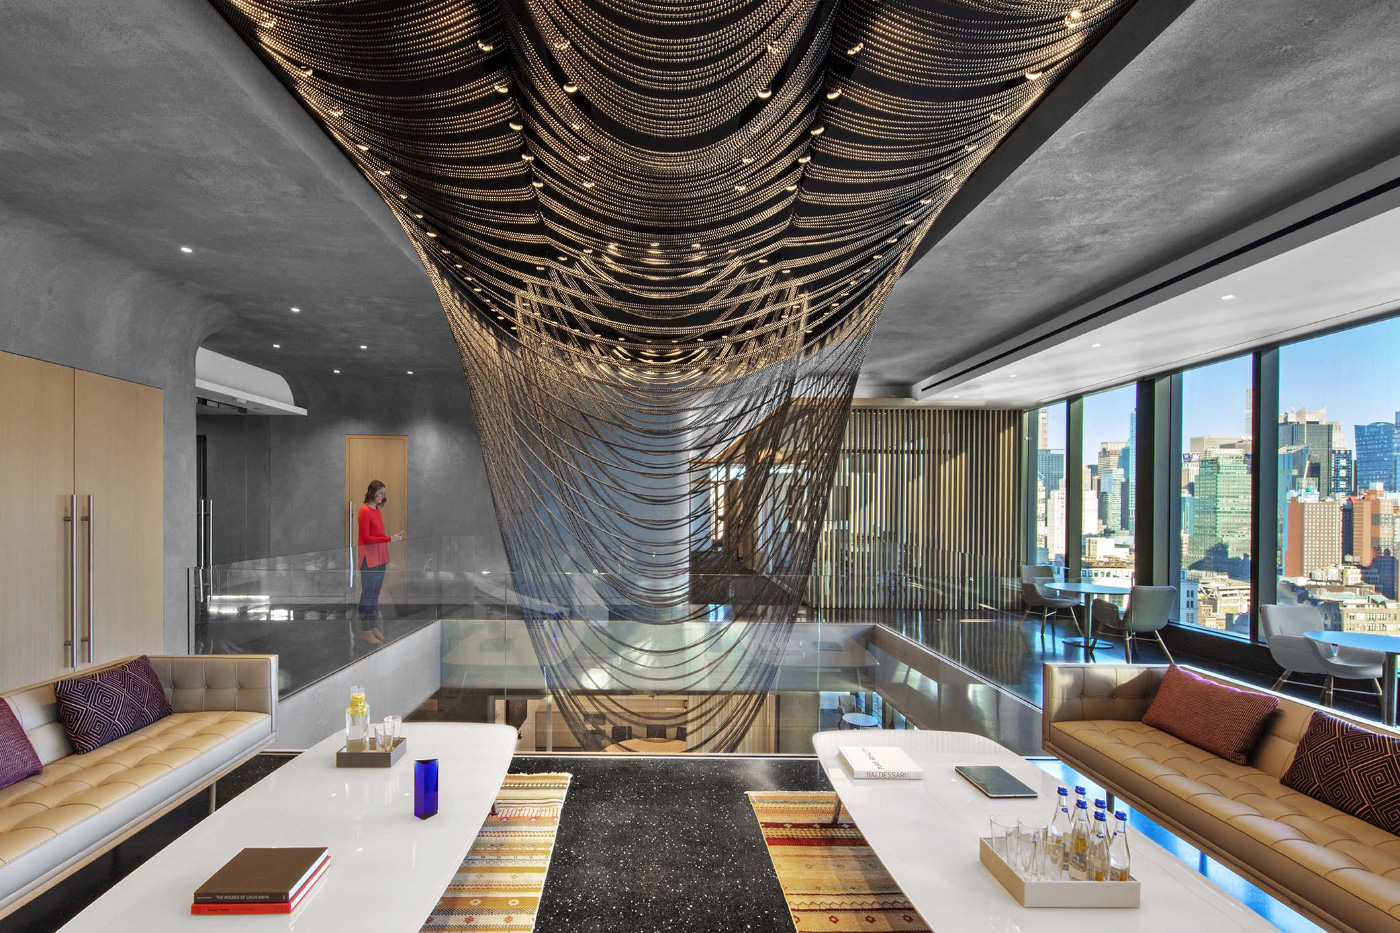 Interior of a concrete office with a bead curtain, designed by Aaron Schiller